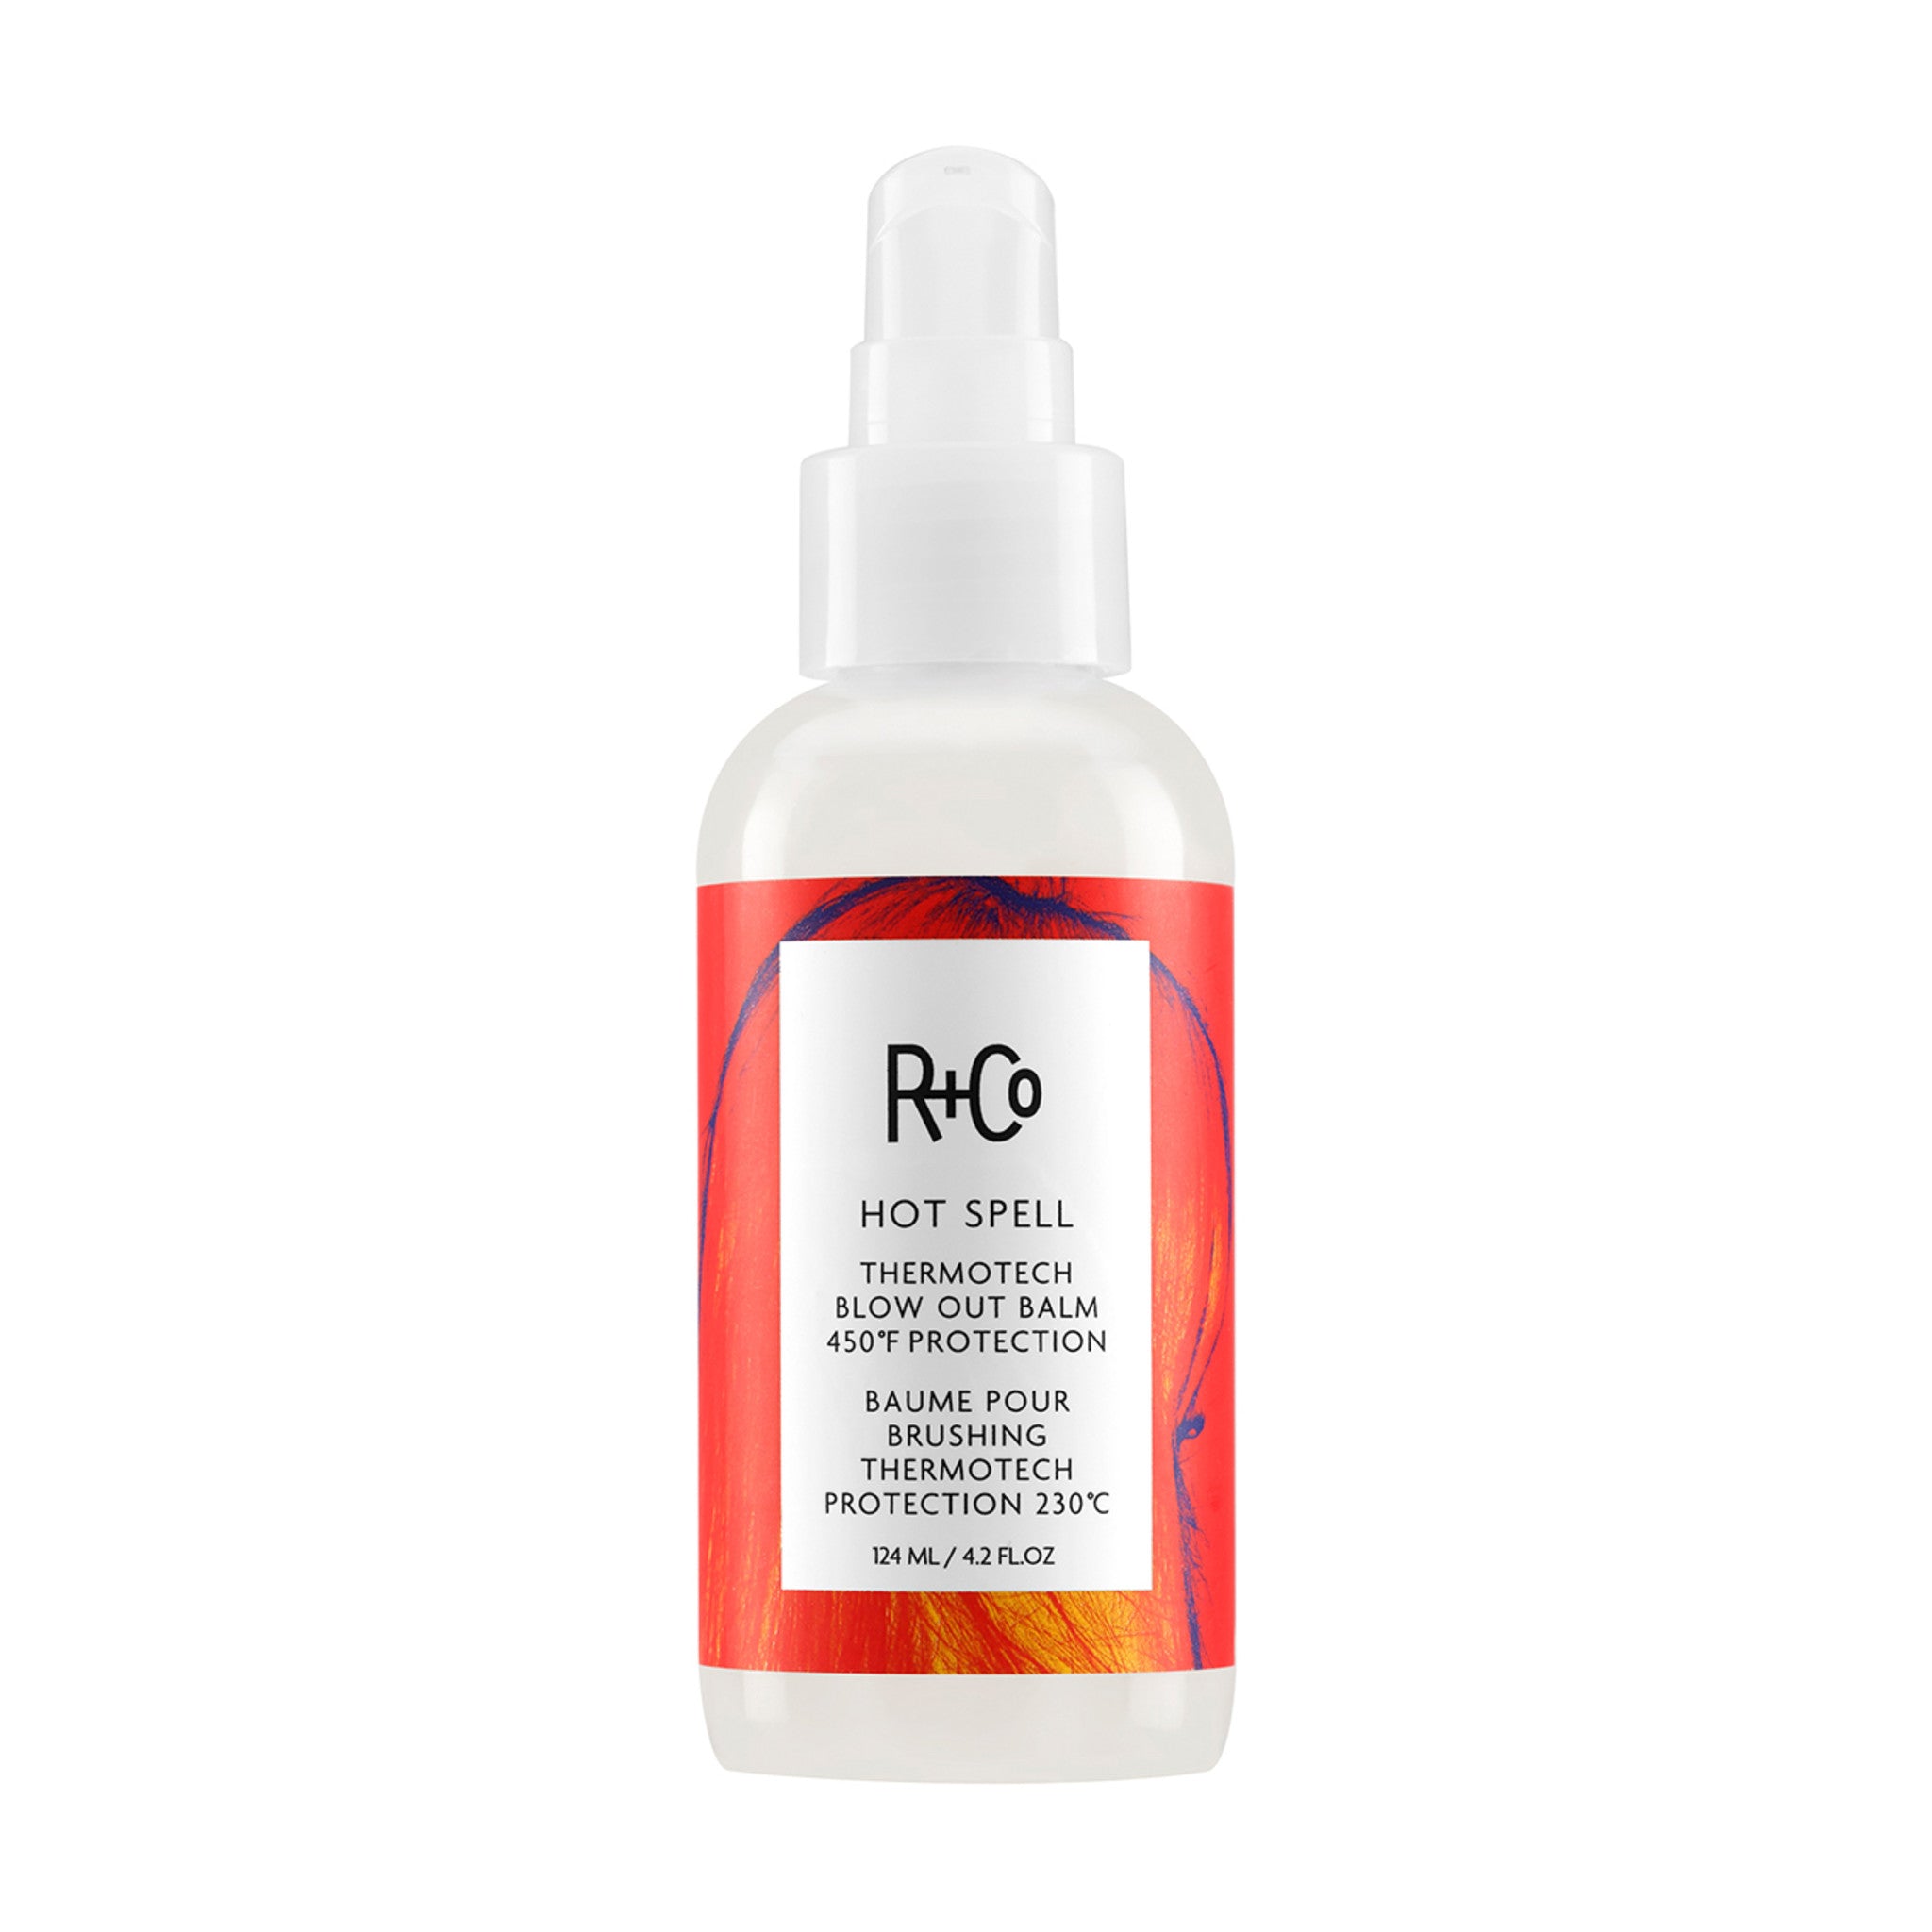 R+Co Hot Spell Thermotech Blow Out Balm main image.